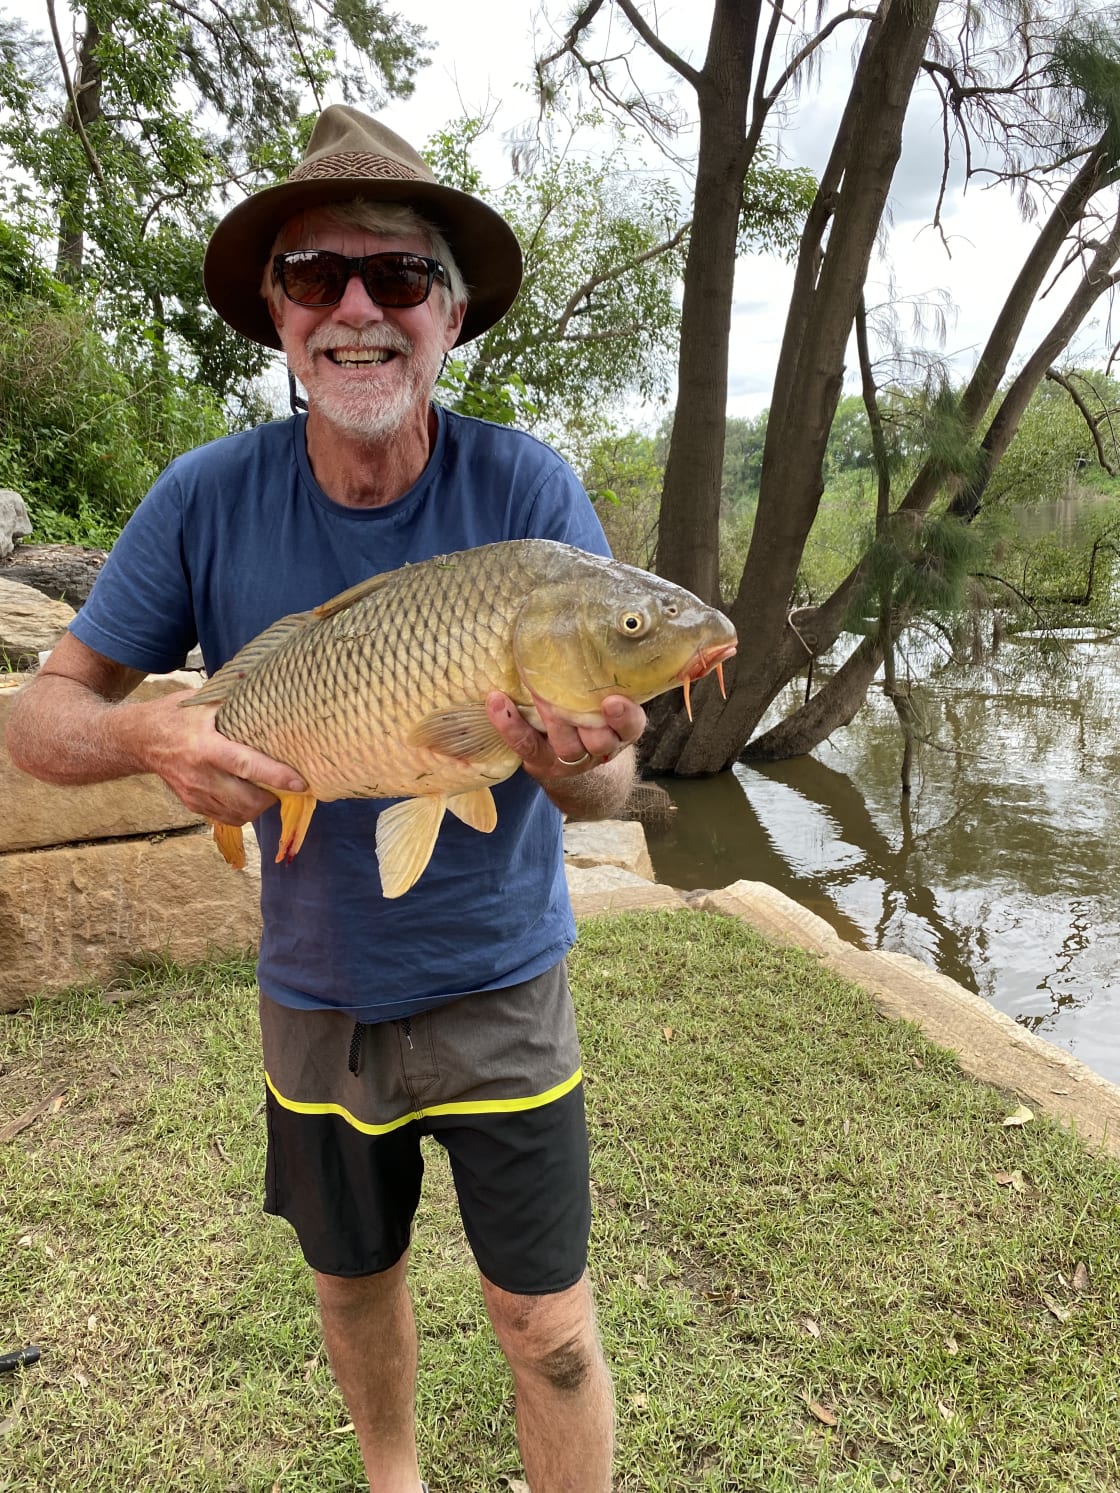 There’s some big carp on the Hawkesbury!